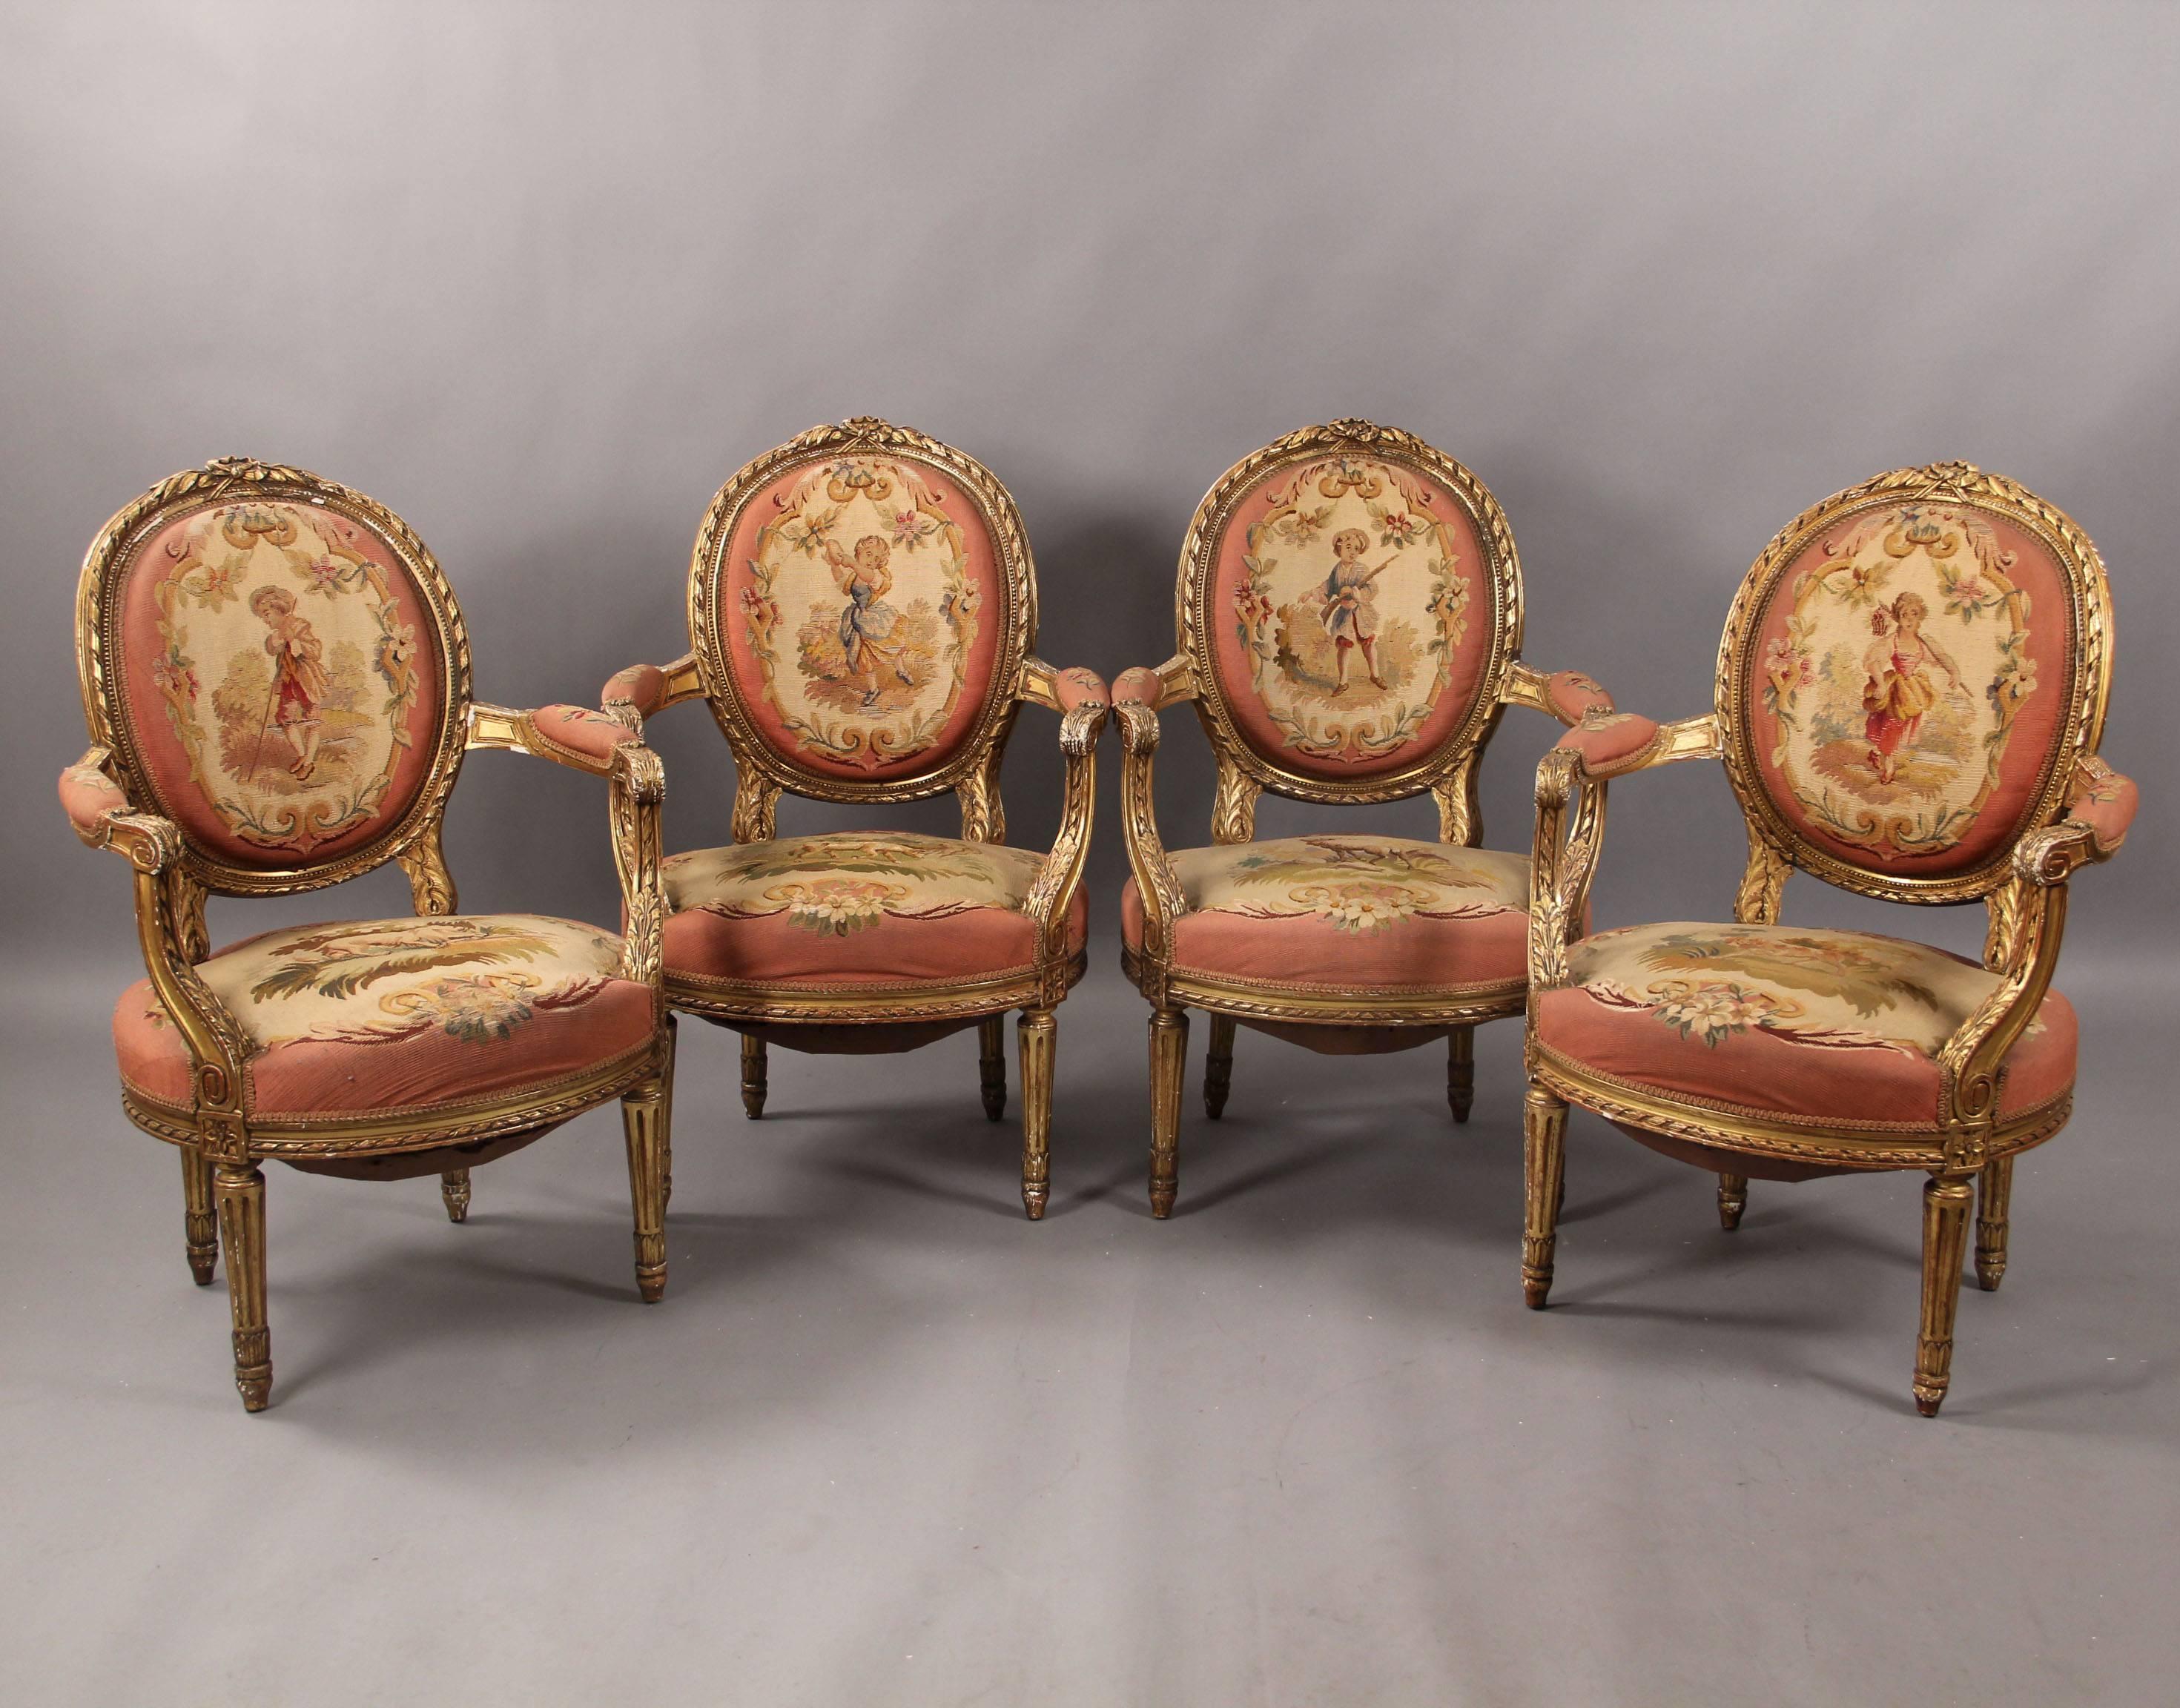 Beautiful Late 19th Century Five-Piece Carved Giltwood Aubusson Parlor ...